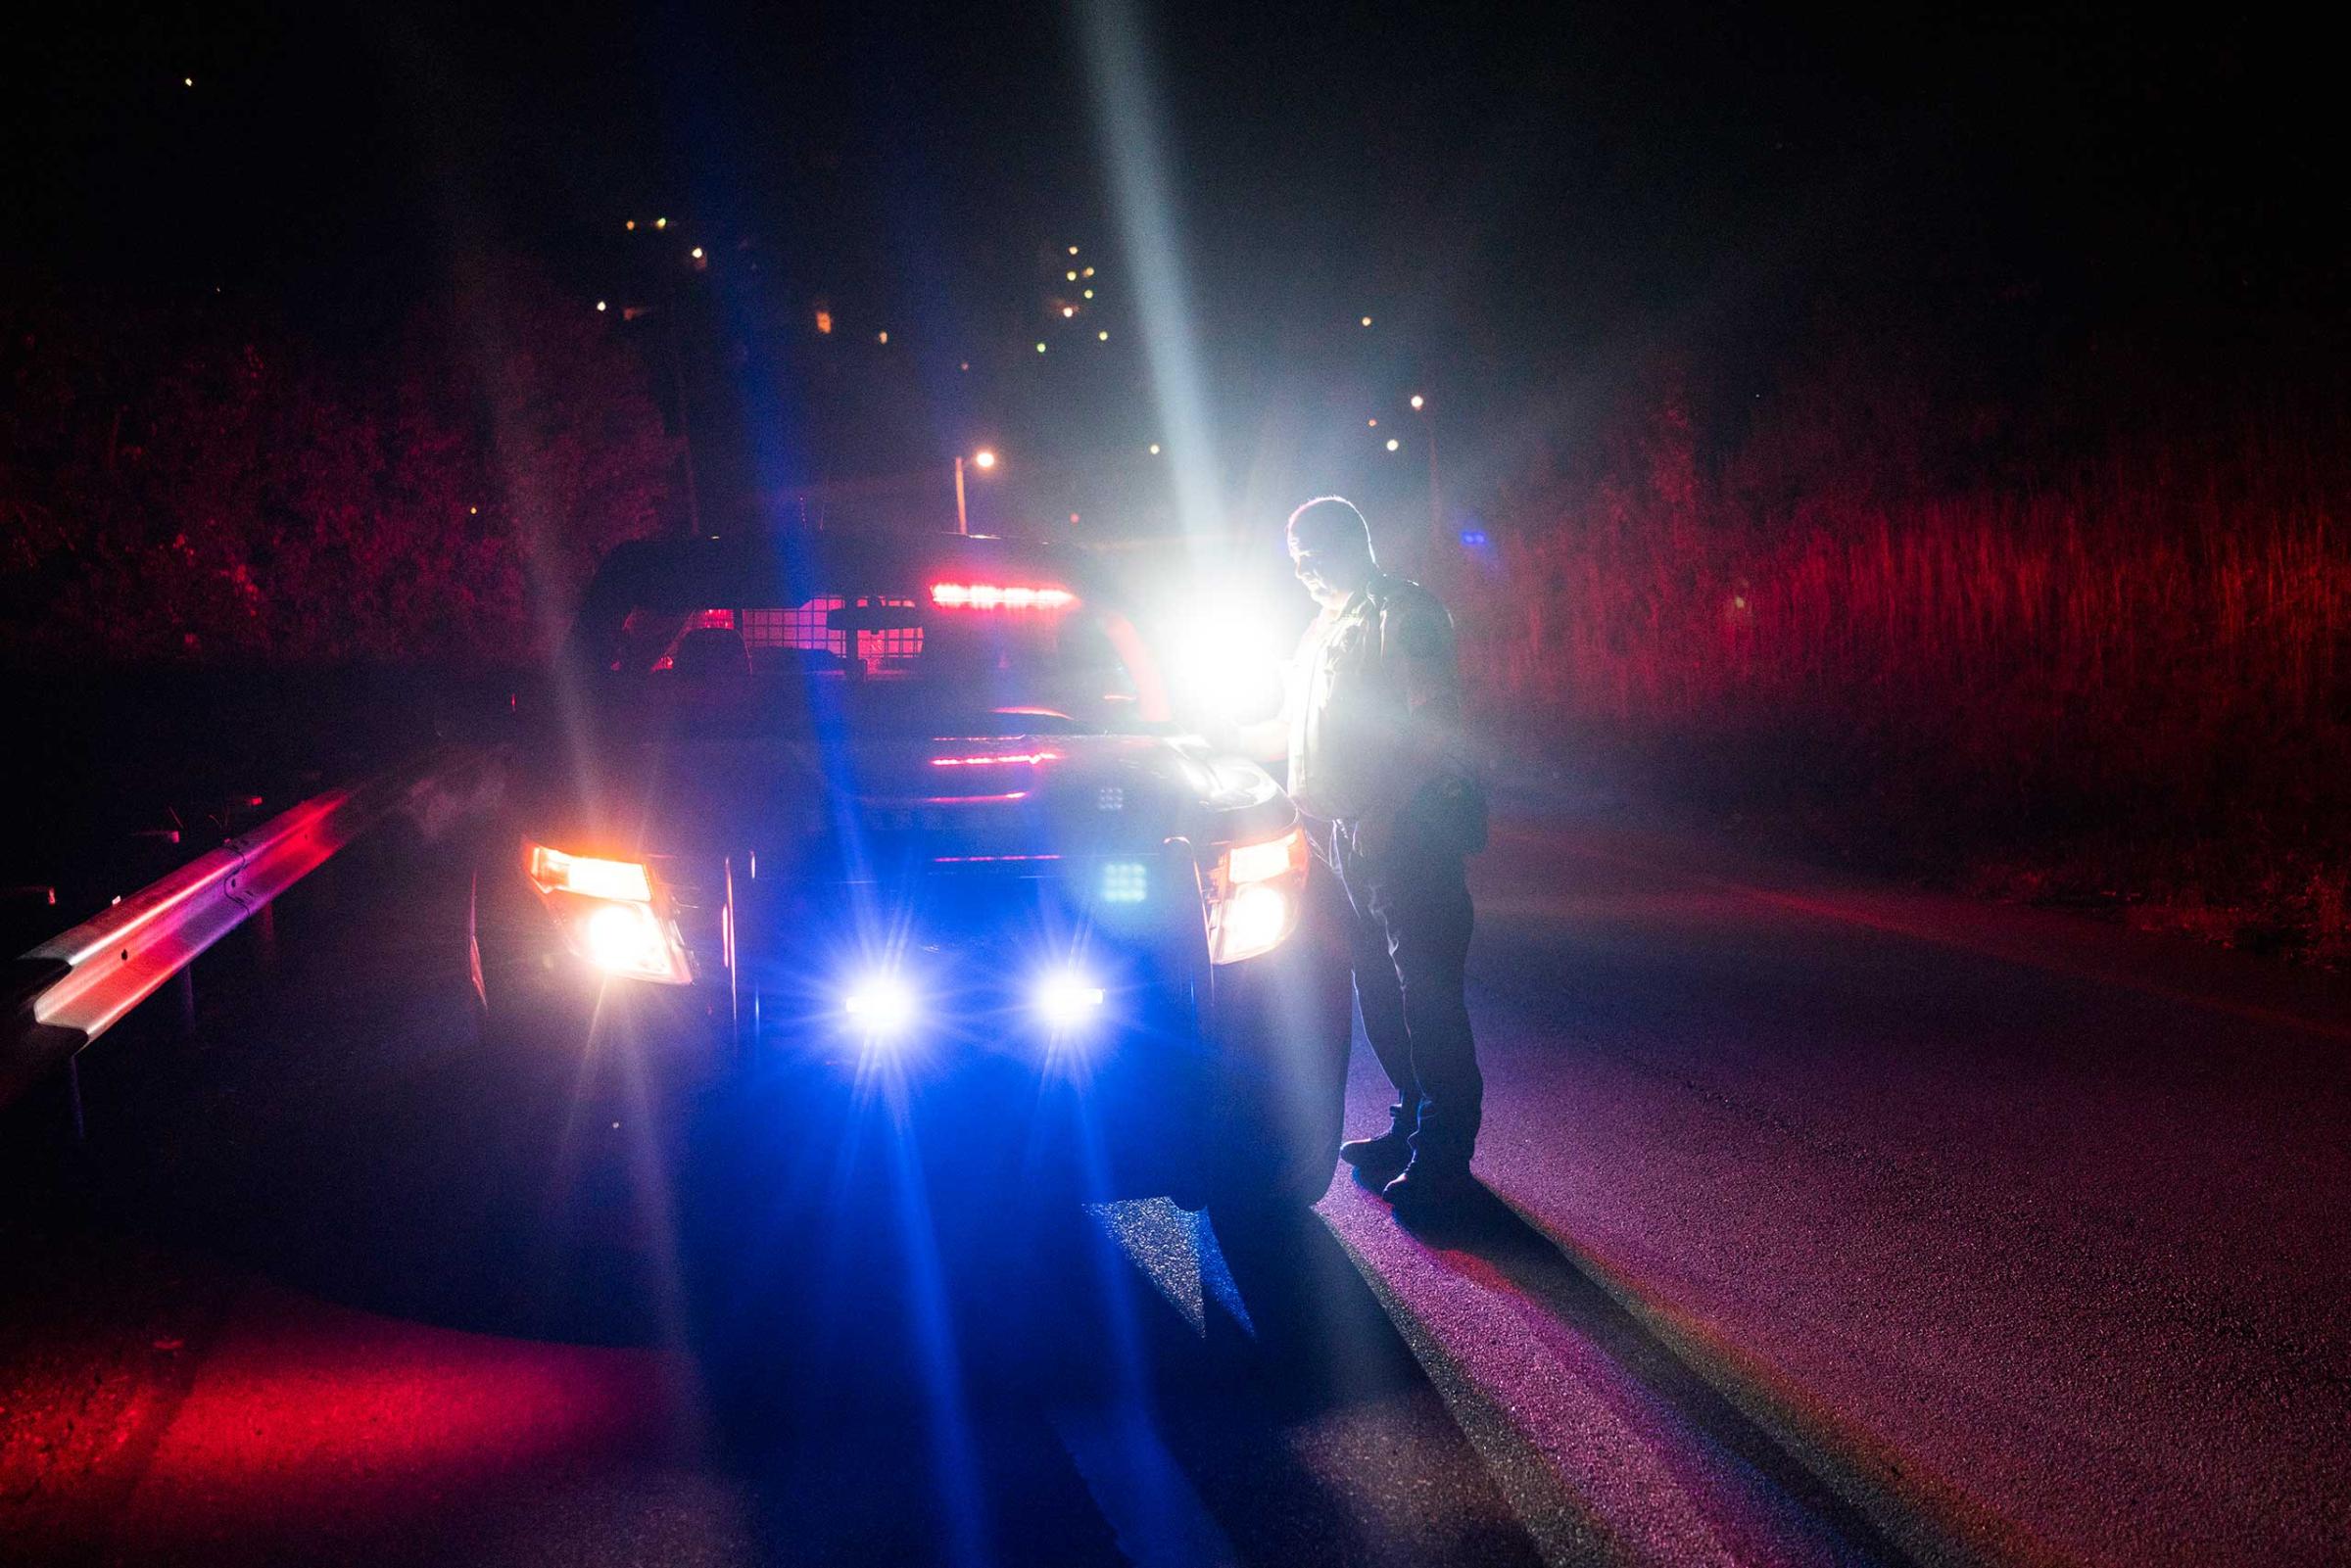 An East Liverpool police officer stands near his vehicle during a possible drug stop on the highway on Oct. 8, 2016. Police said many drug users have a Driver’s ID from one state and plates from another since East Liverpool is right on the border between Ohio, Pennsylvania and West Virginia. Drug offensives are much more severe in the latter, so many prefer to be caught and charged in Ohio.